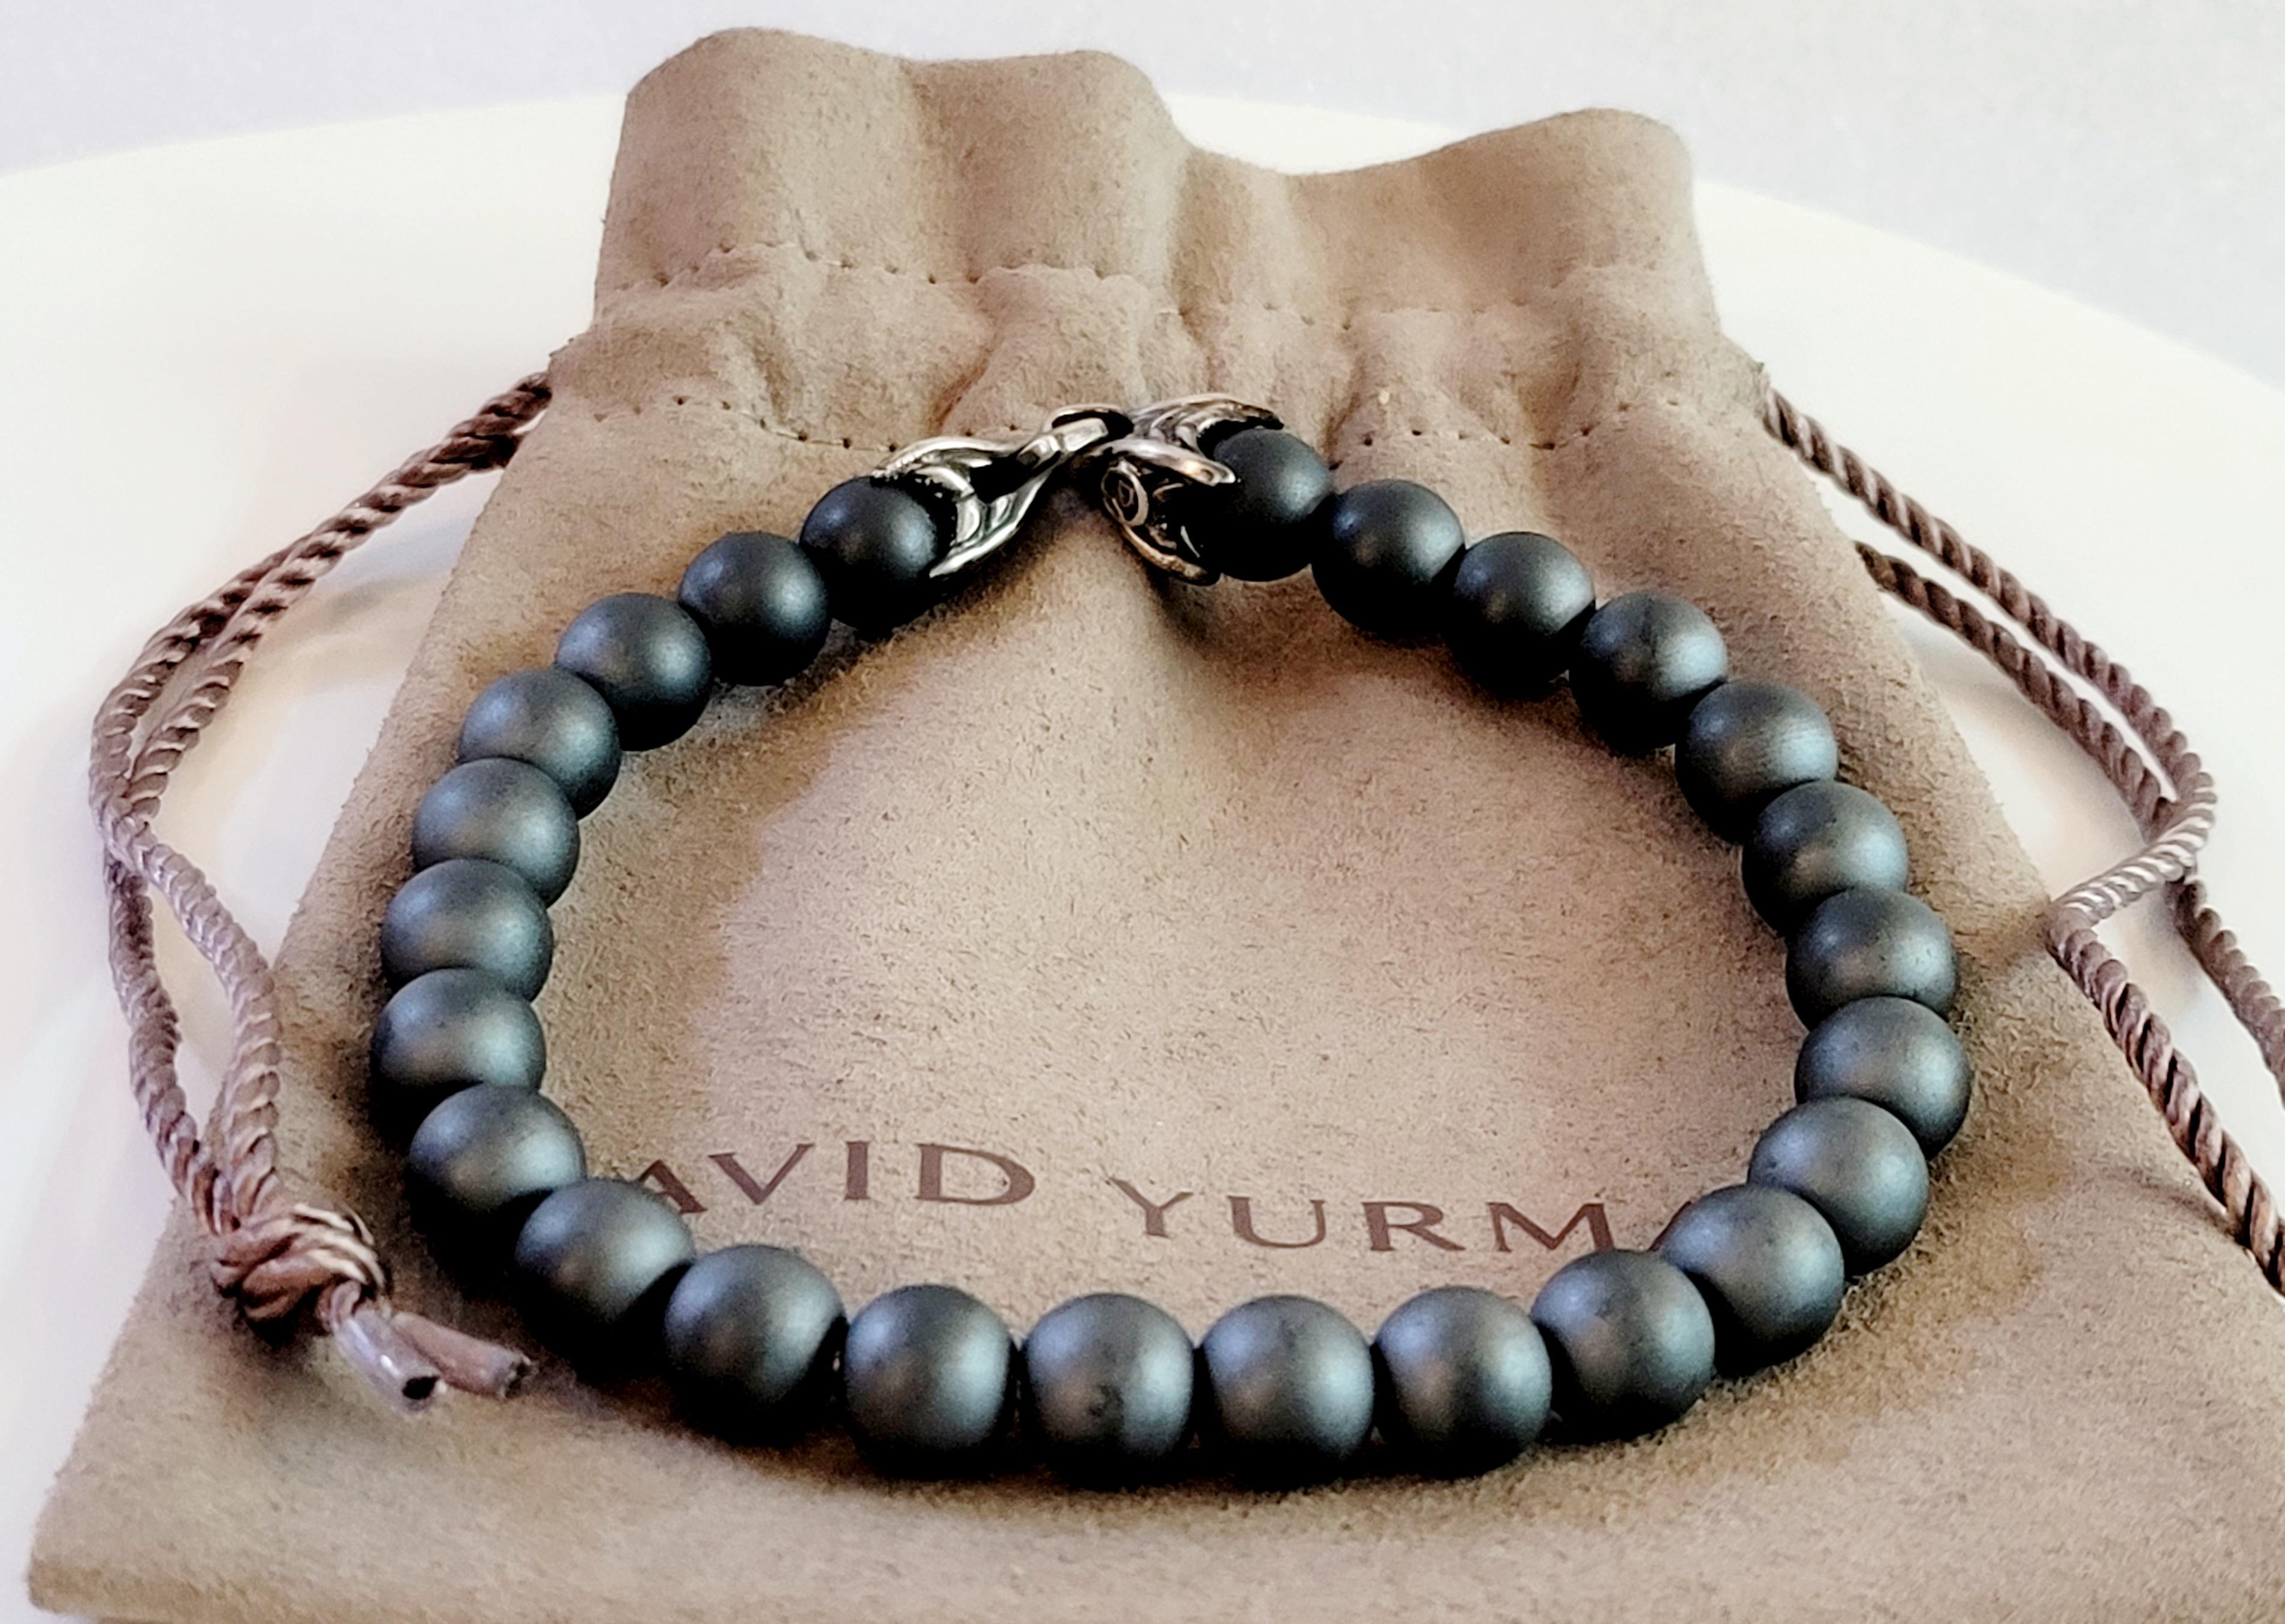 David Yurman Spiritual Matte Grey Beaded Bracelet in Sterling Silver 8mm In New Condition For Sale In New York, NY